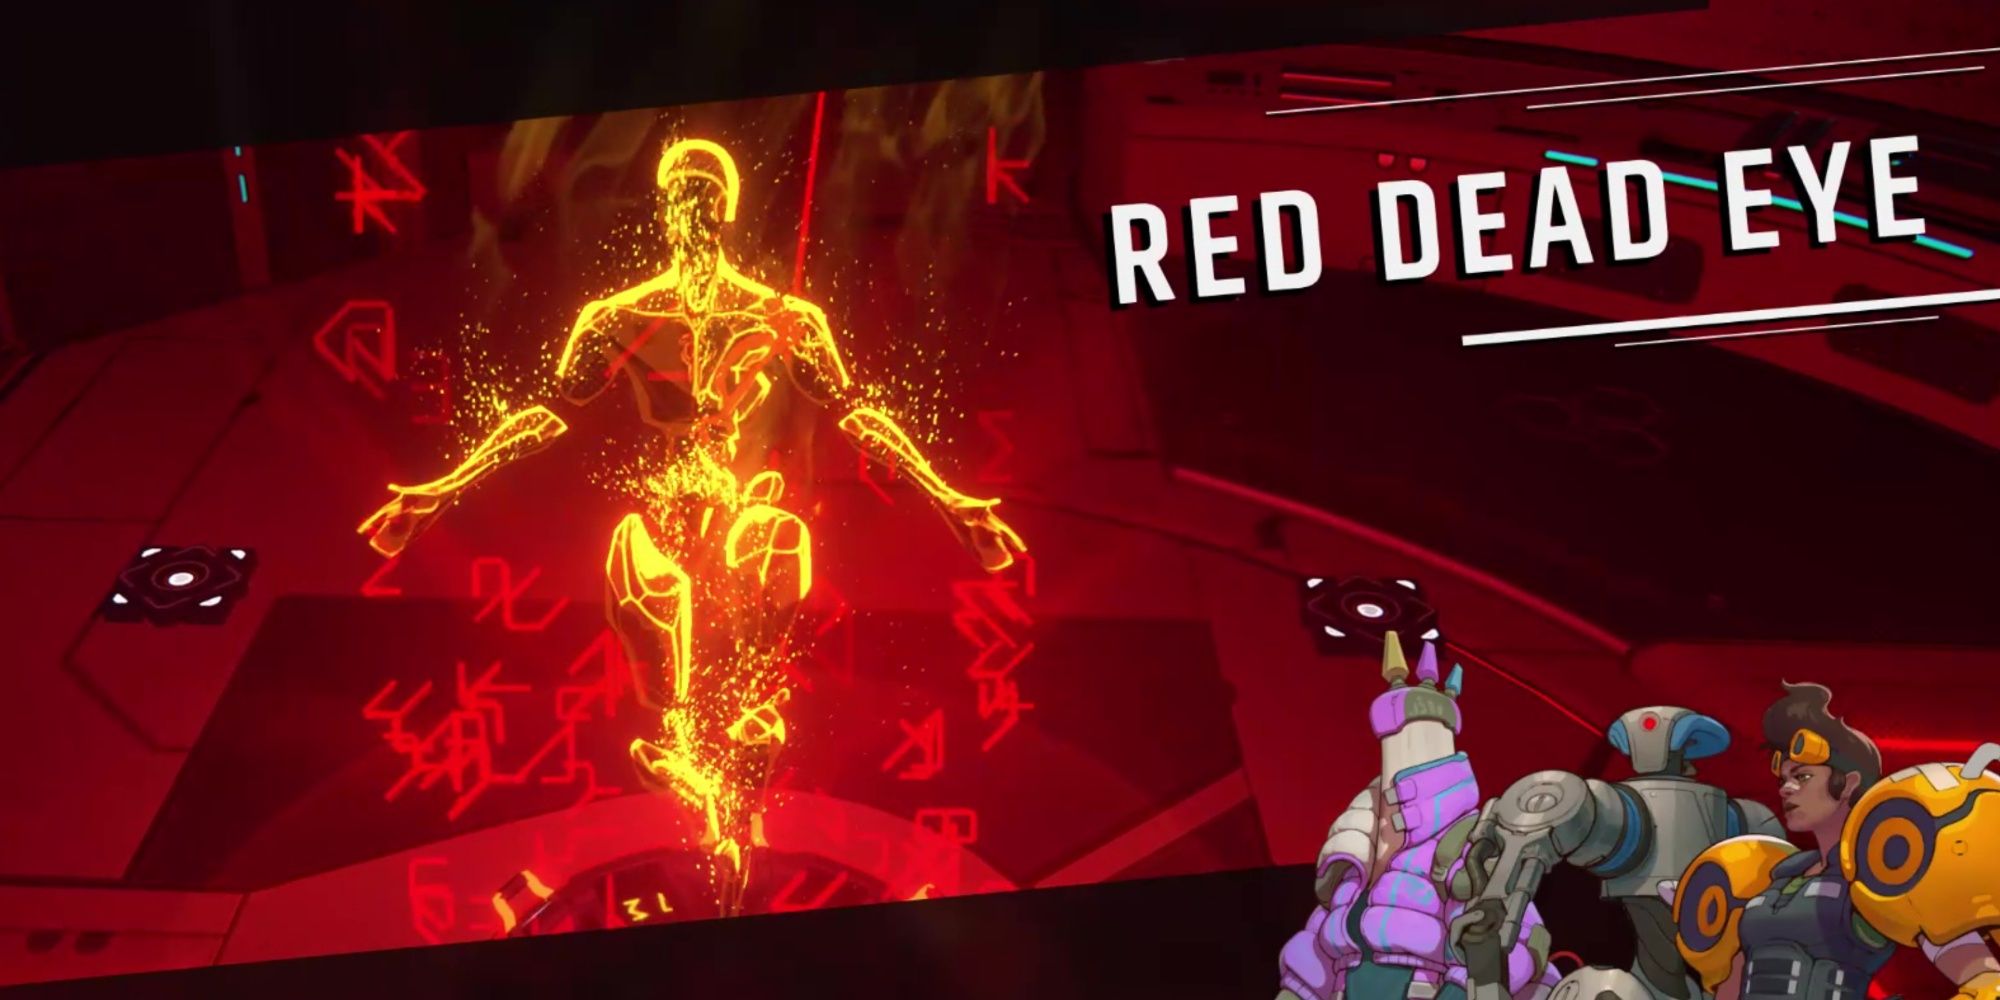 Red Dead Eye's introductory cutscene nameplate in Endless Dungeon